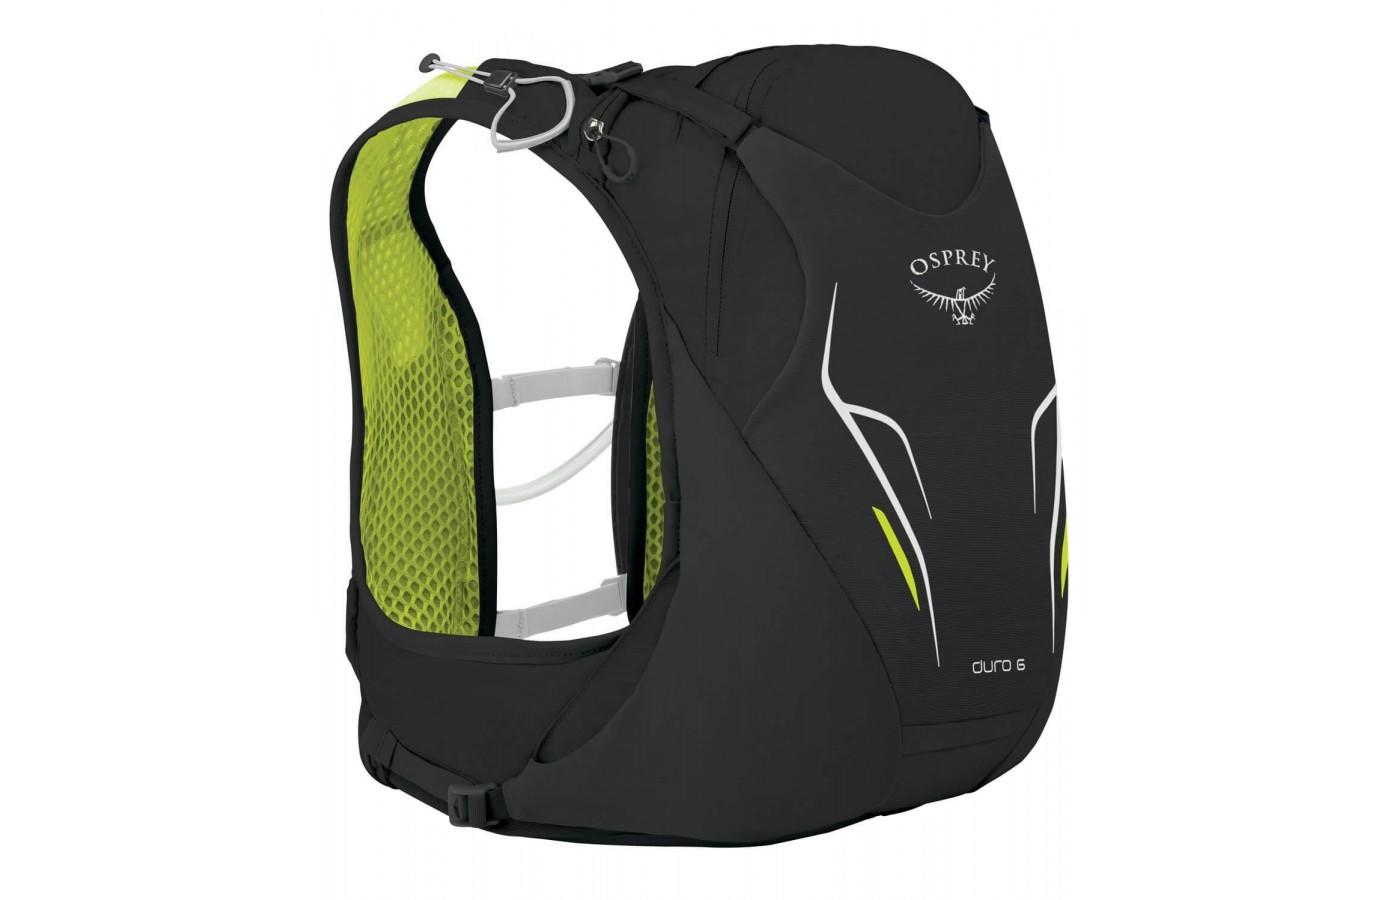 The Osprey Duro 6 is a durable hydration vest perfect for longer hikes or runs. 